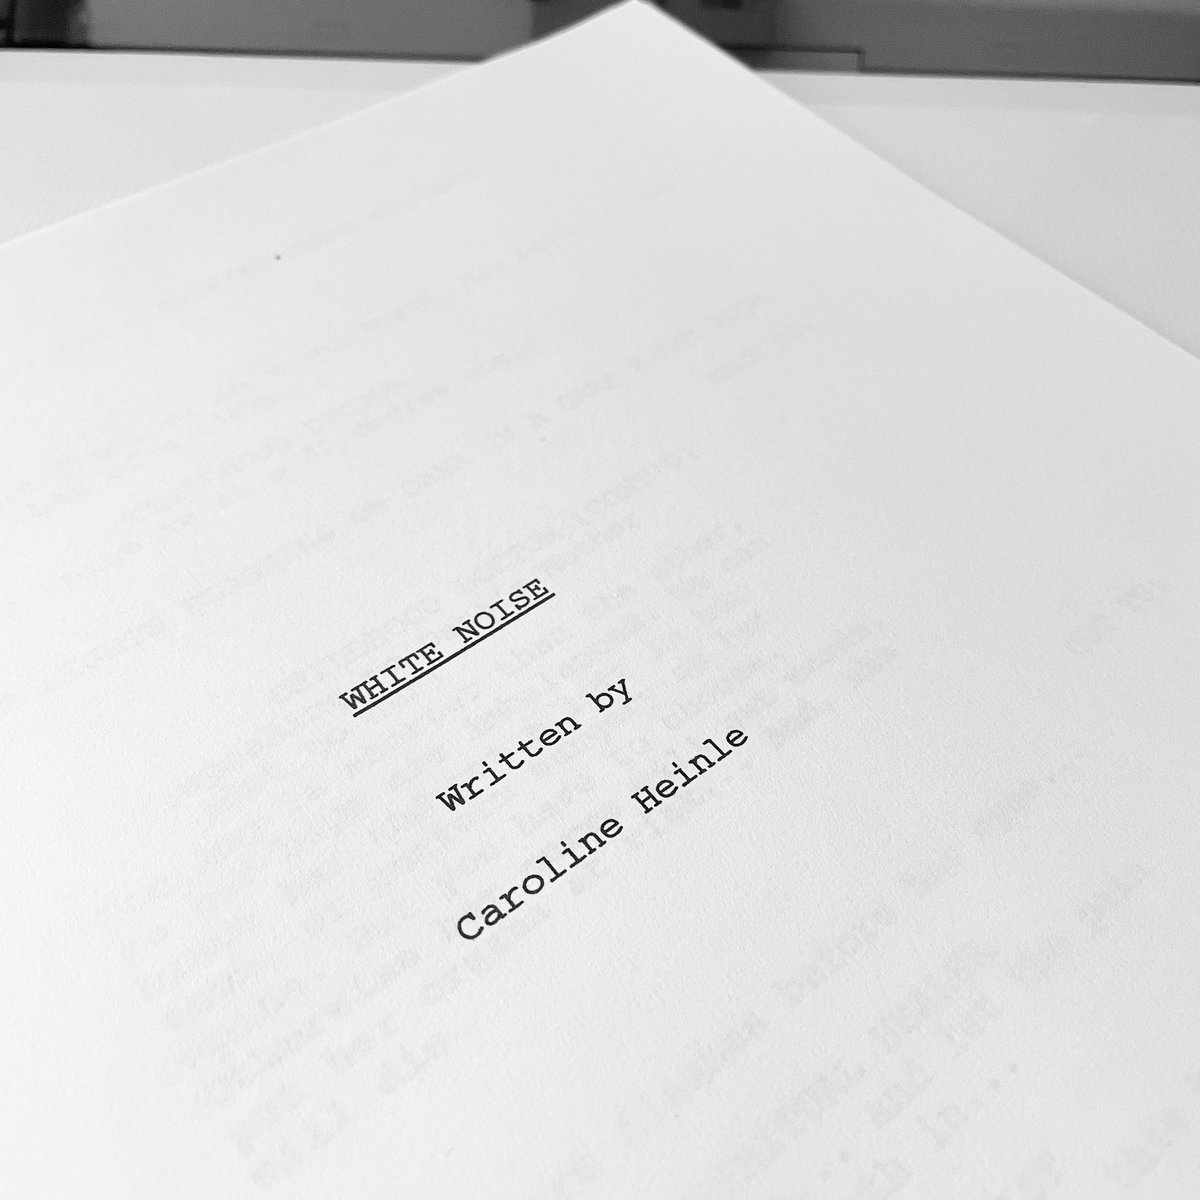 😭 I’m so proud 🥲 My baby is finally finished and moving into production! White Noise is a short film based on my experiences with #scoliosis and #spinalfusion 🎬 #StayTuned #ComingSoon #ScreenWriterLife